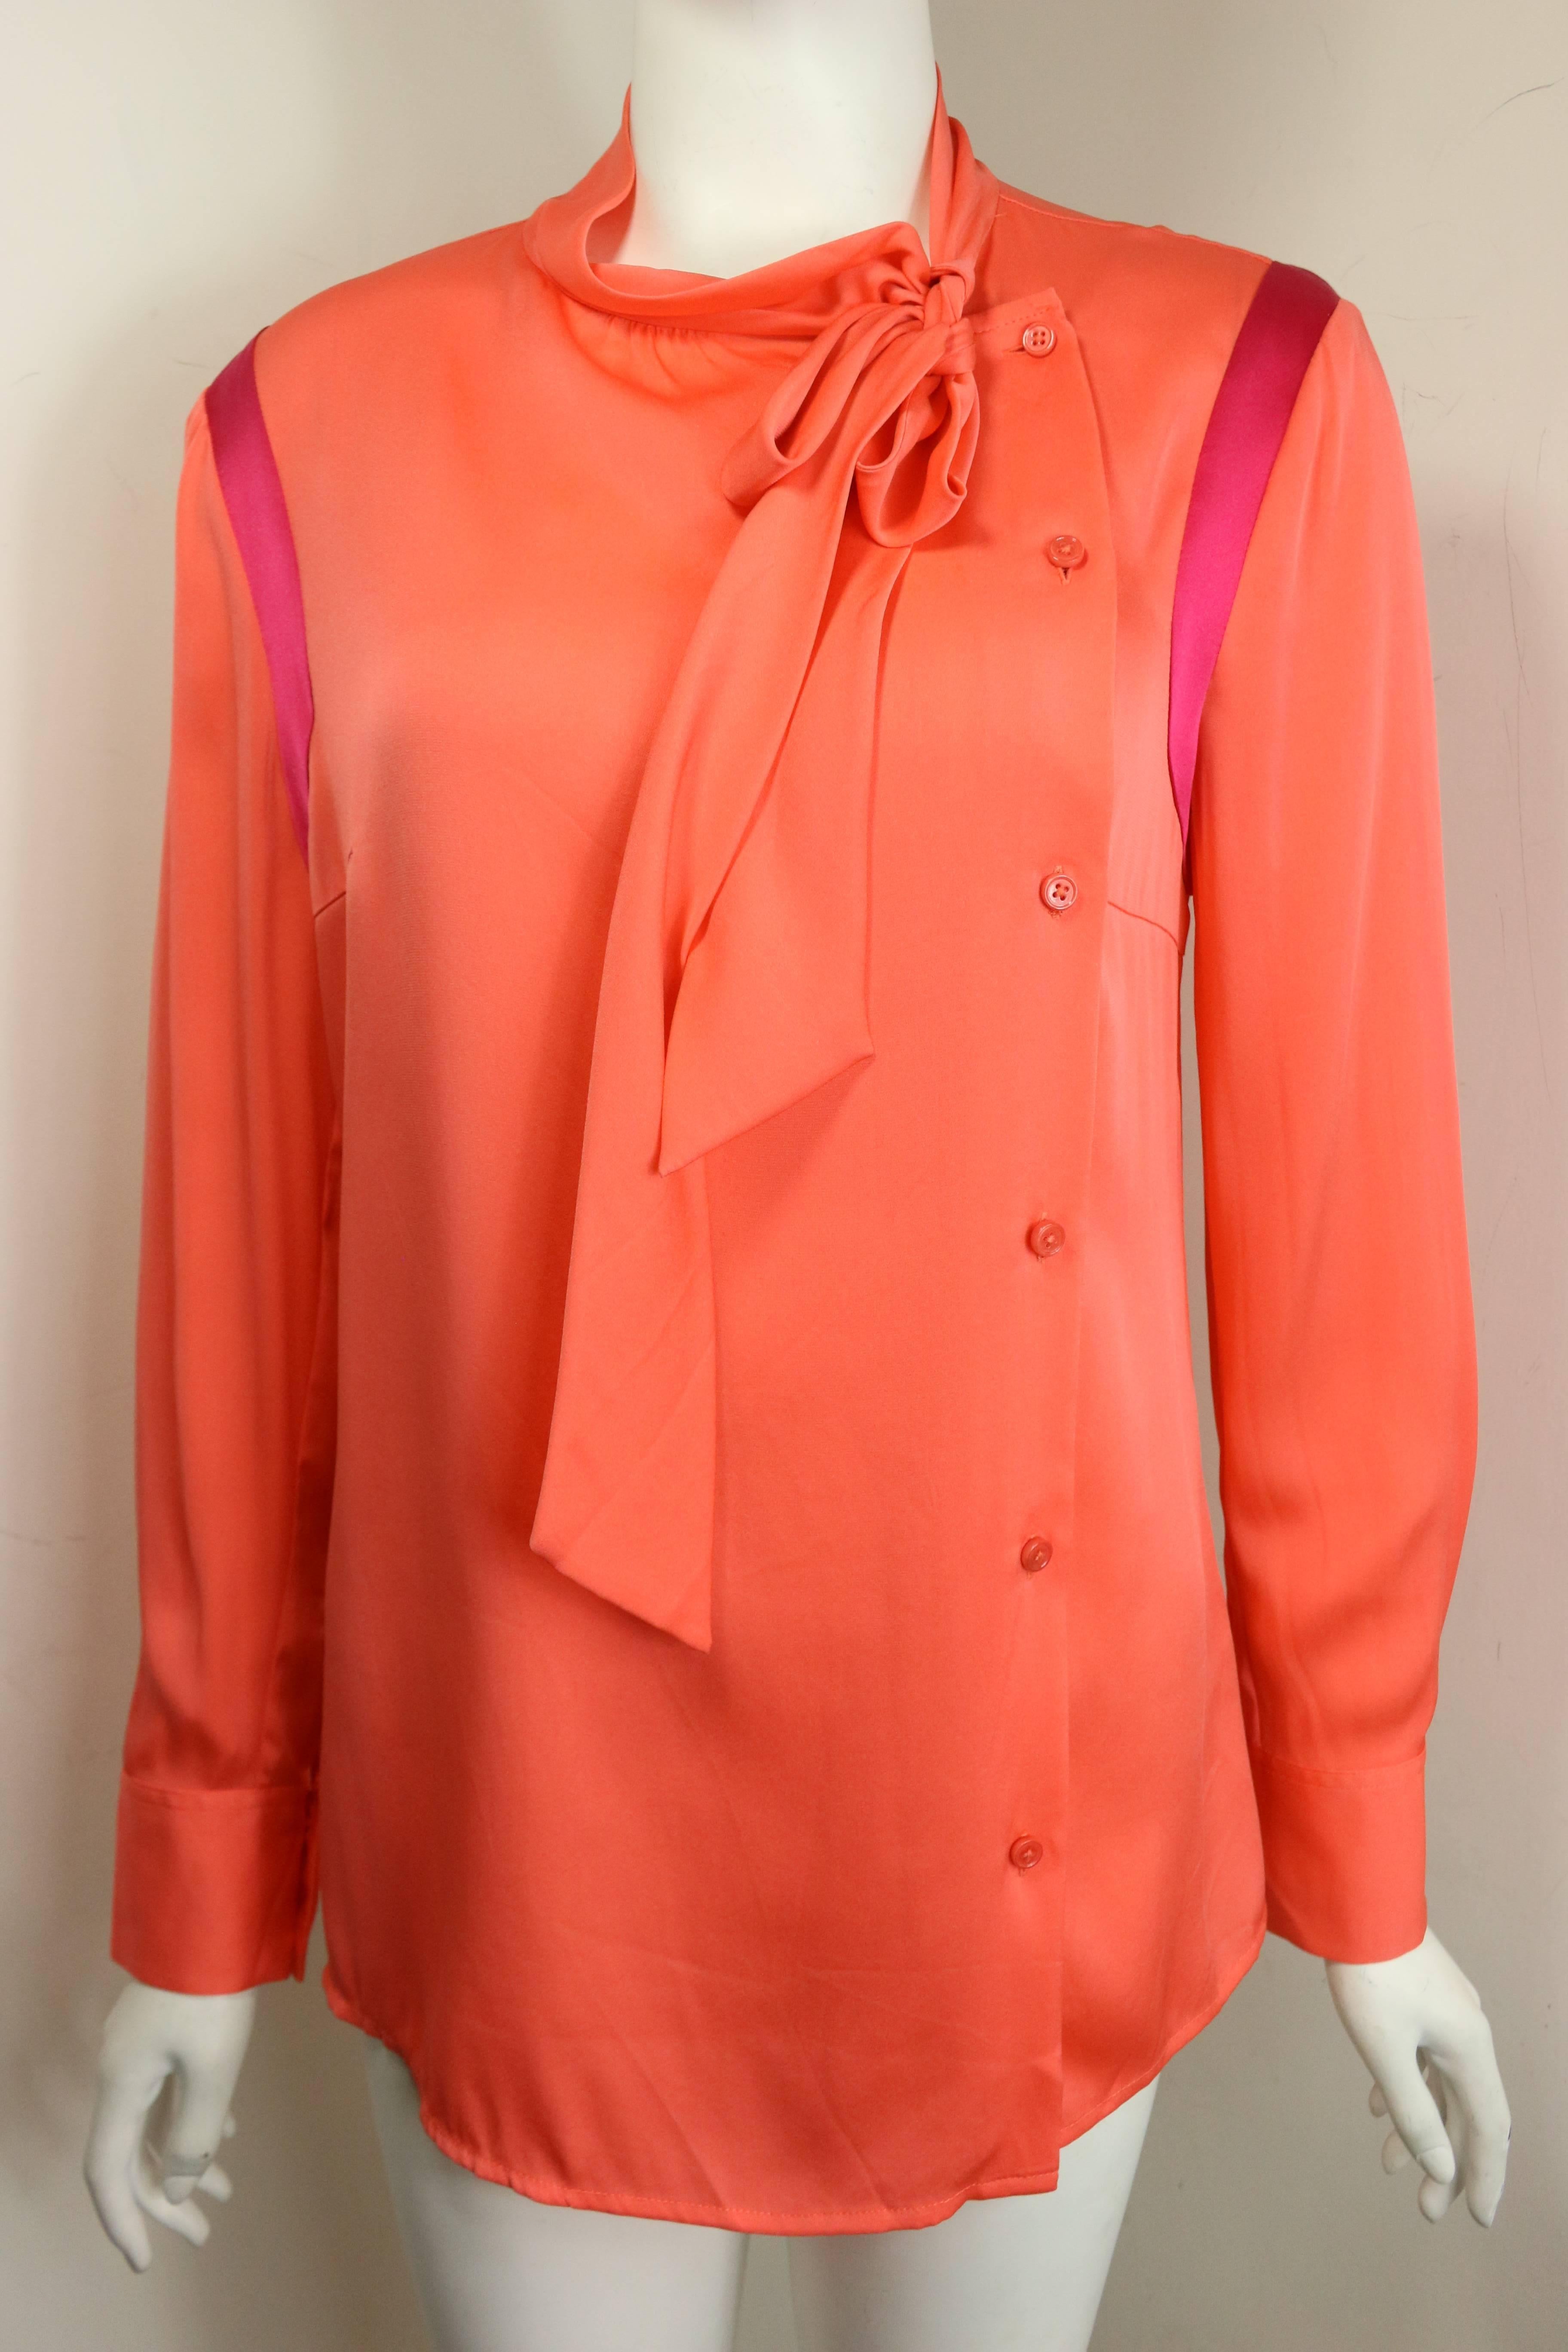 - Ports orange silk button shirt. Pink panels on the shoulder sleeves. 

- Featuring collar can be tied as a ribbon. Buttons fastening on the left. 

- Size 8. 

- 100% Silk. 
